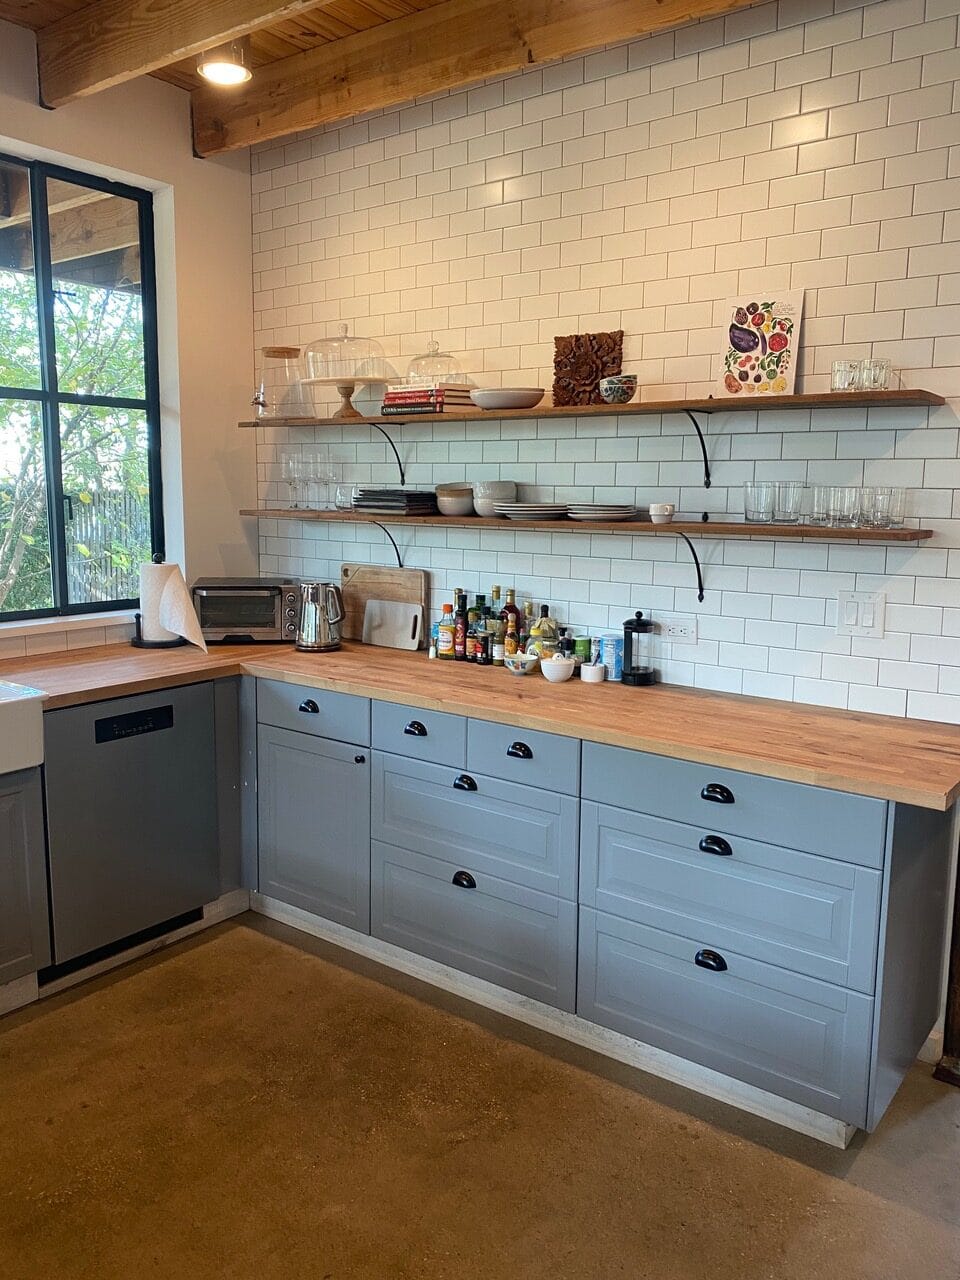 An Unspired Kitchen Gets an Authetnitc Makeover With Semihandmade